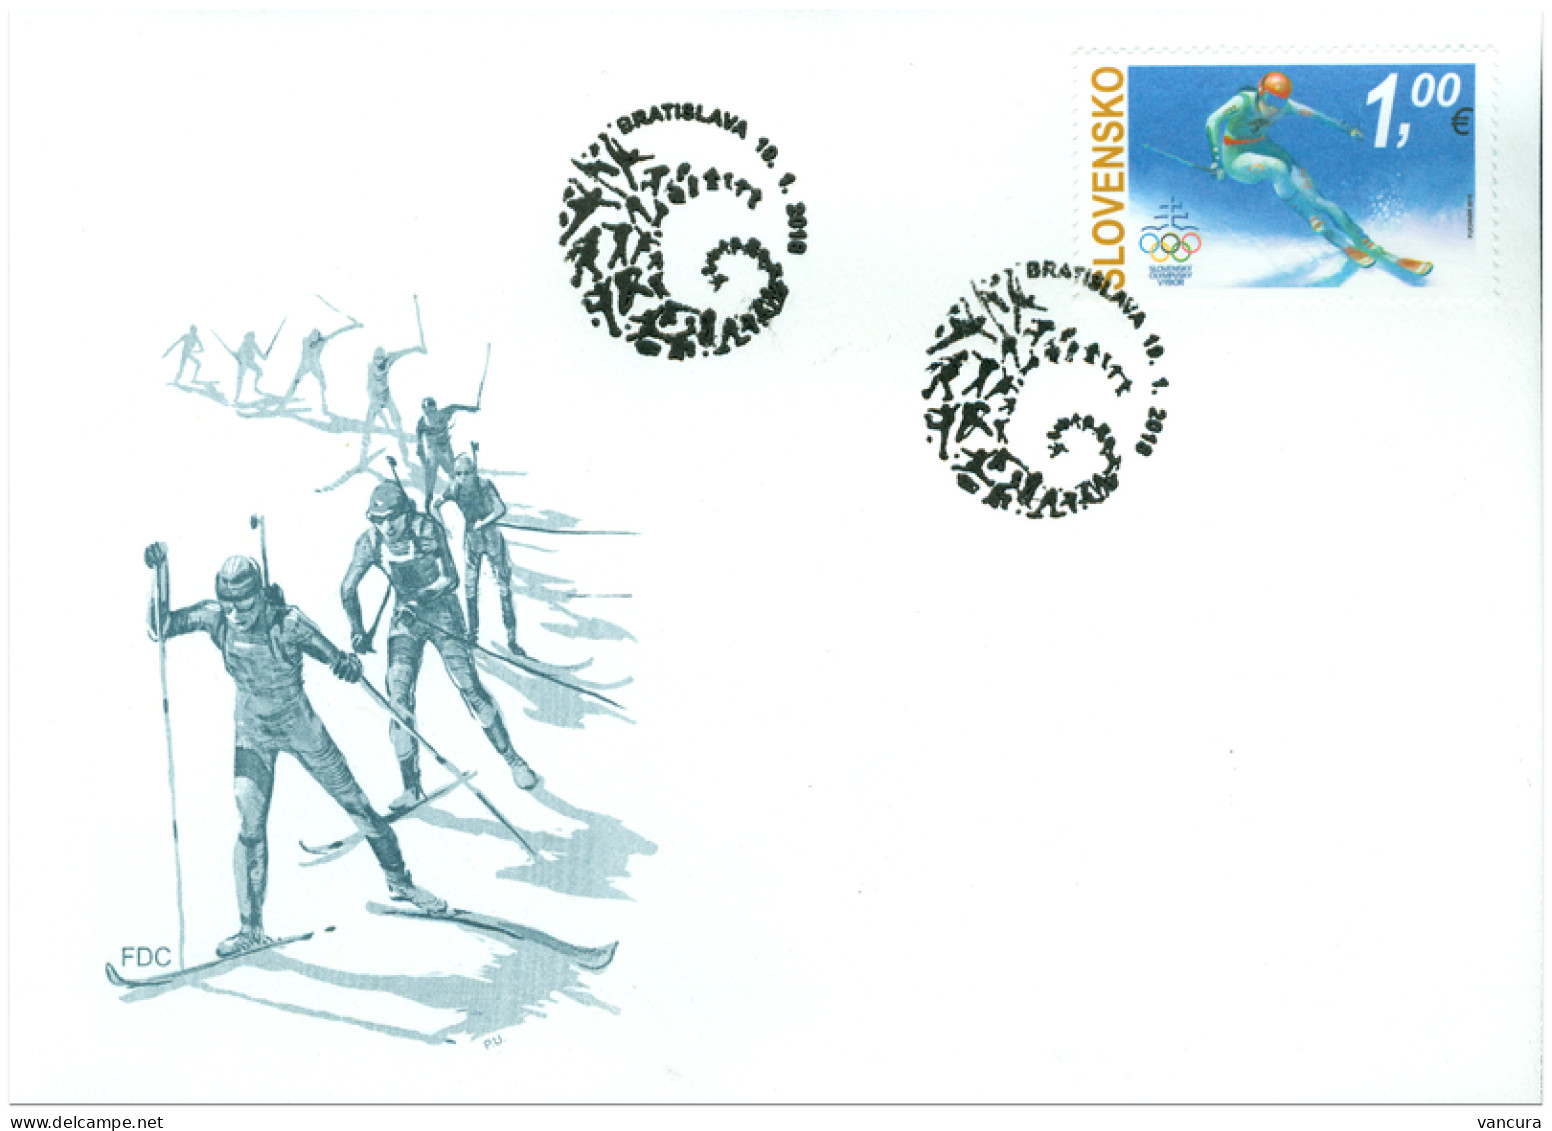 FDC 653 And 655 Slovakia. Winter Olympic Games Pyeongchang And Paralympic Games 2018 - Winter 2018: Pyeongchang